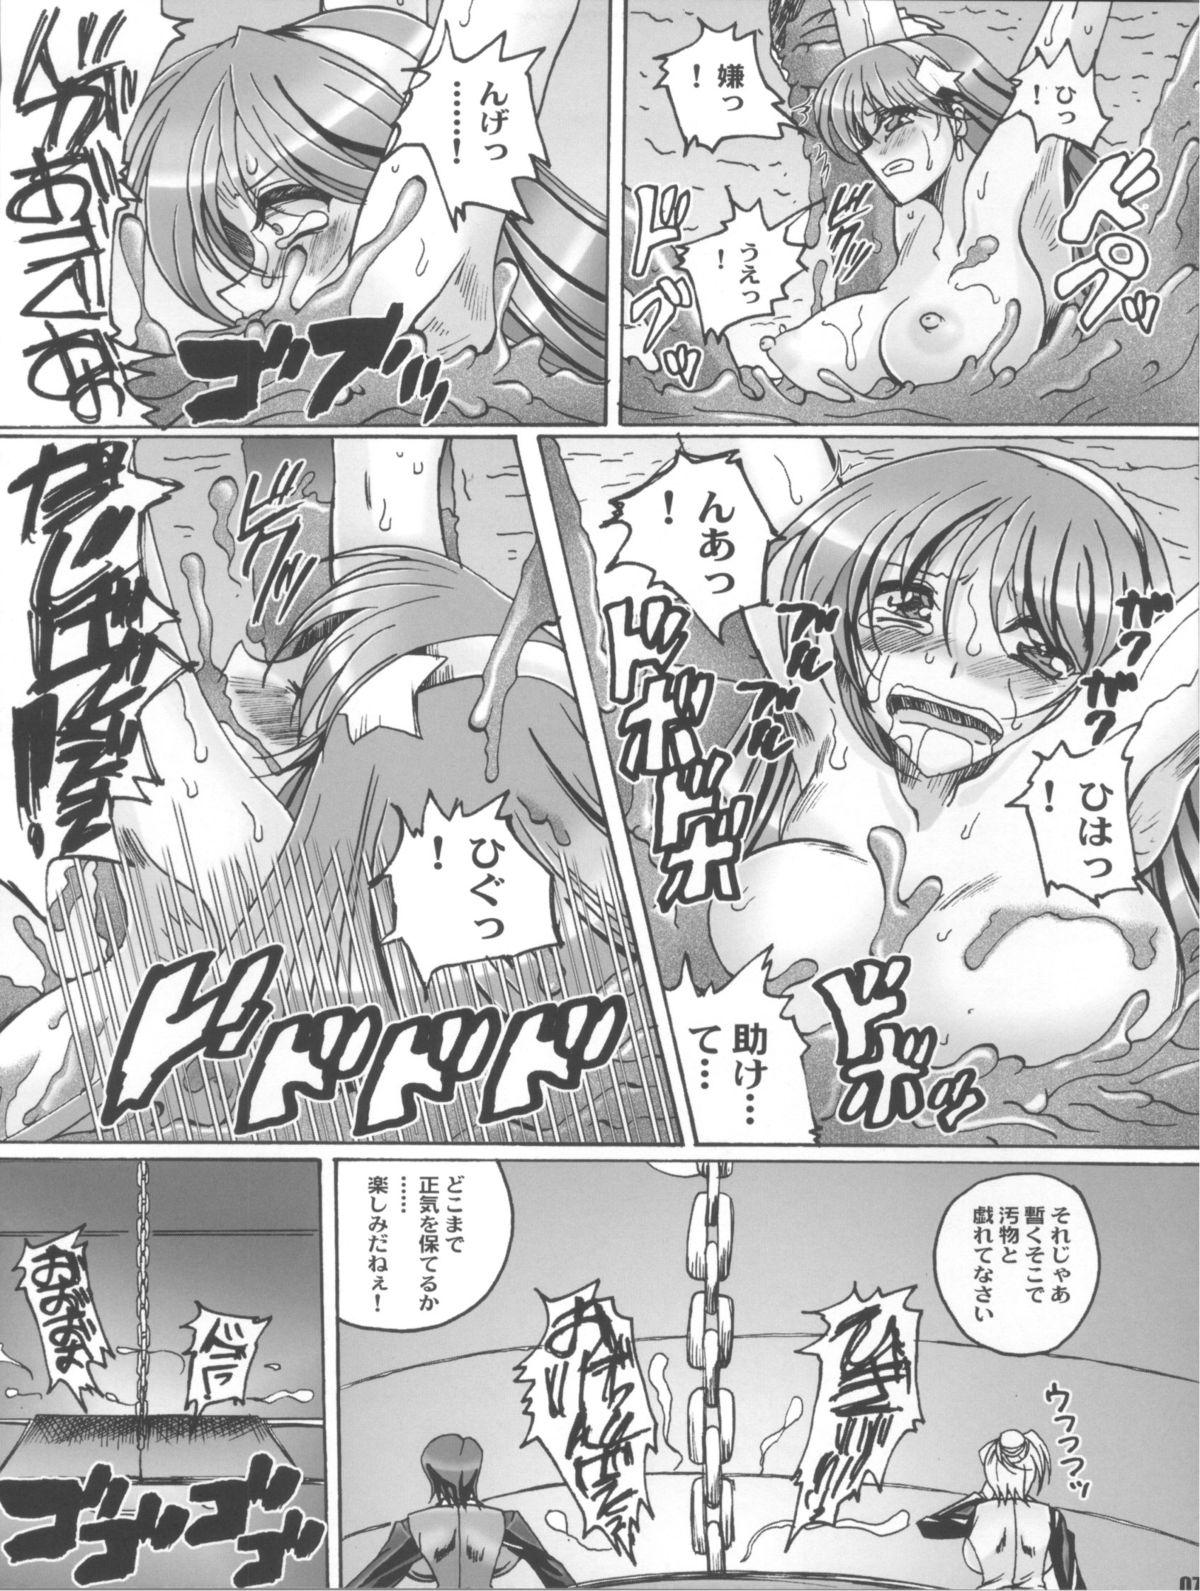 Muscular Tokoton Athena - King of fighters Hair - Page 7